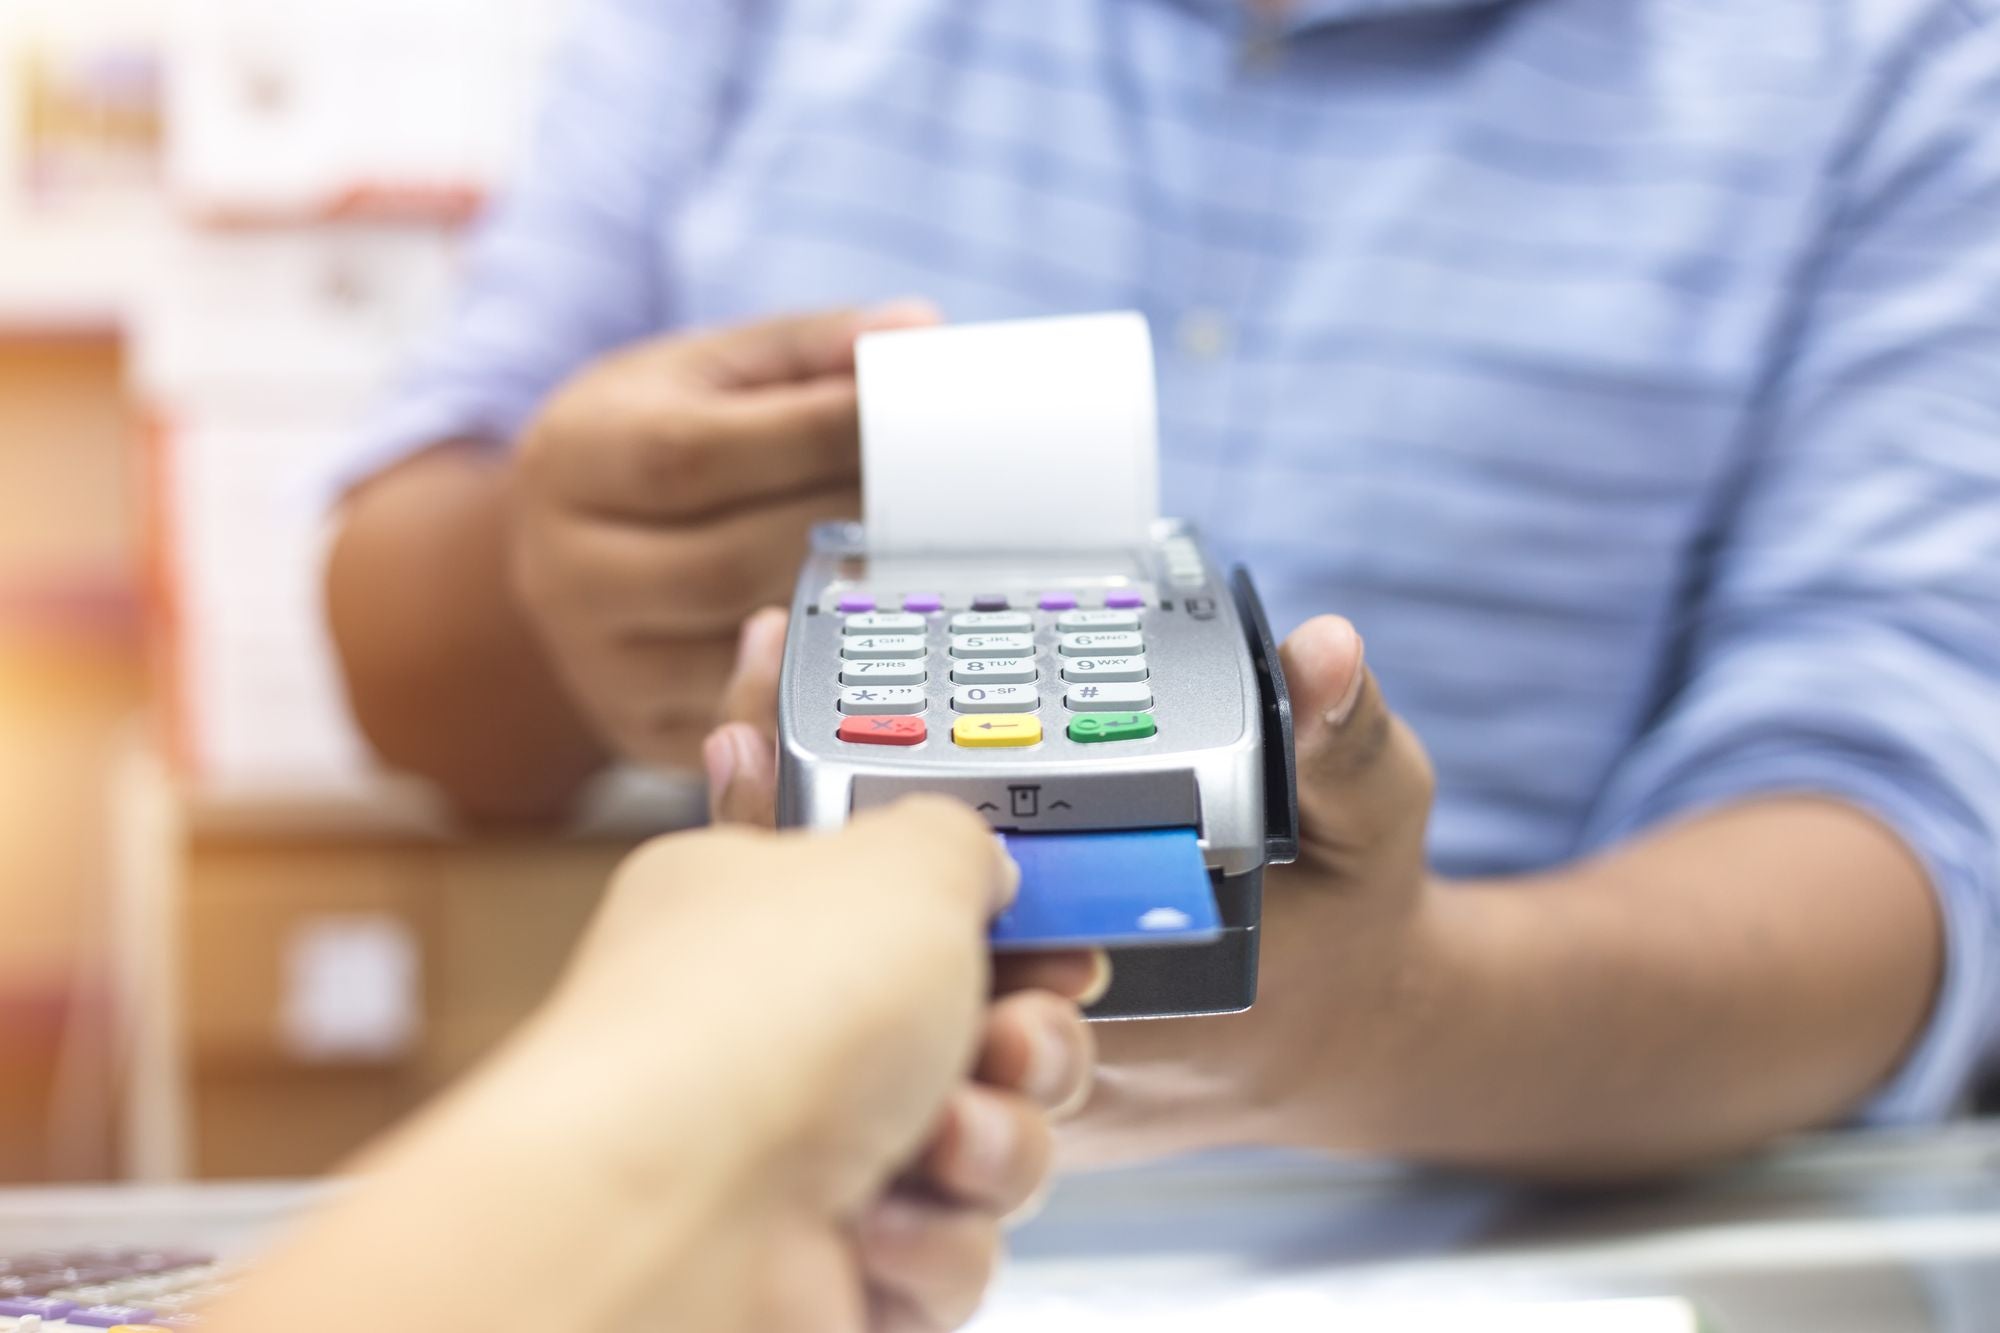 cheapest credit card processing companies